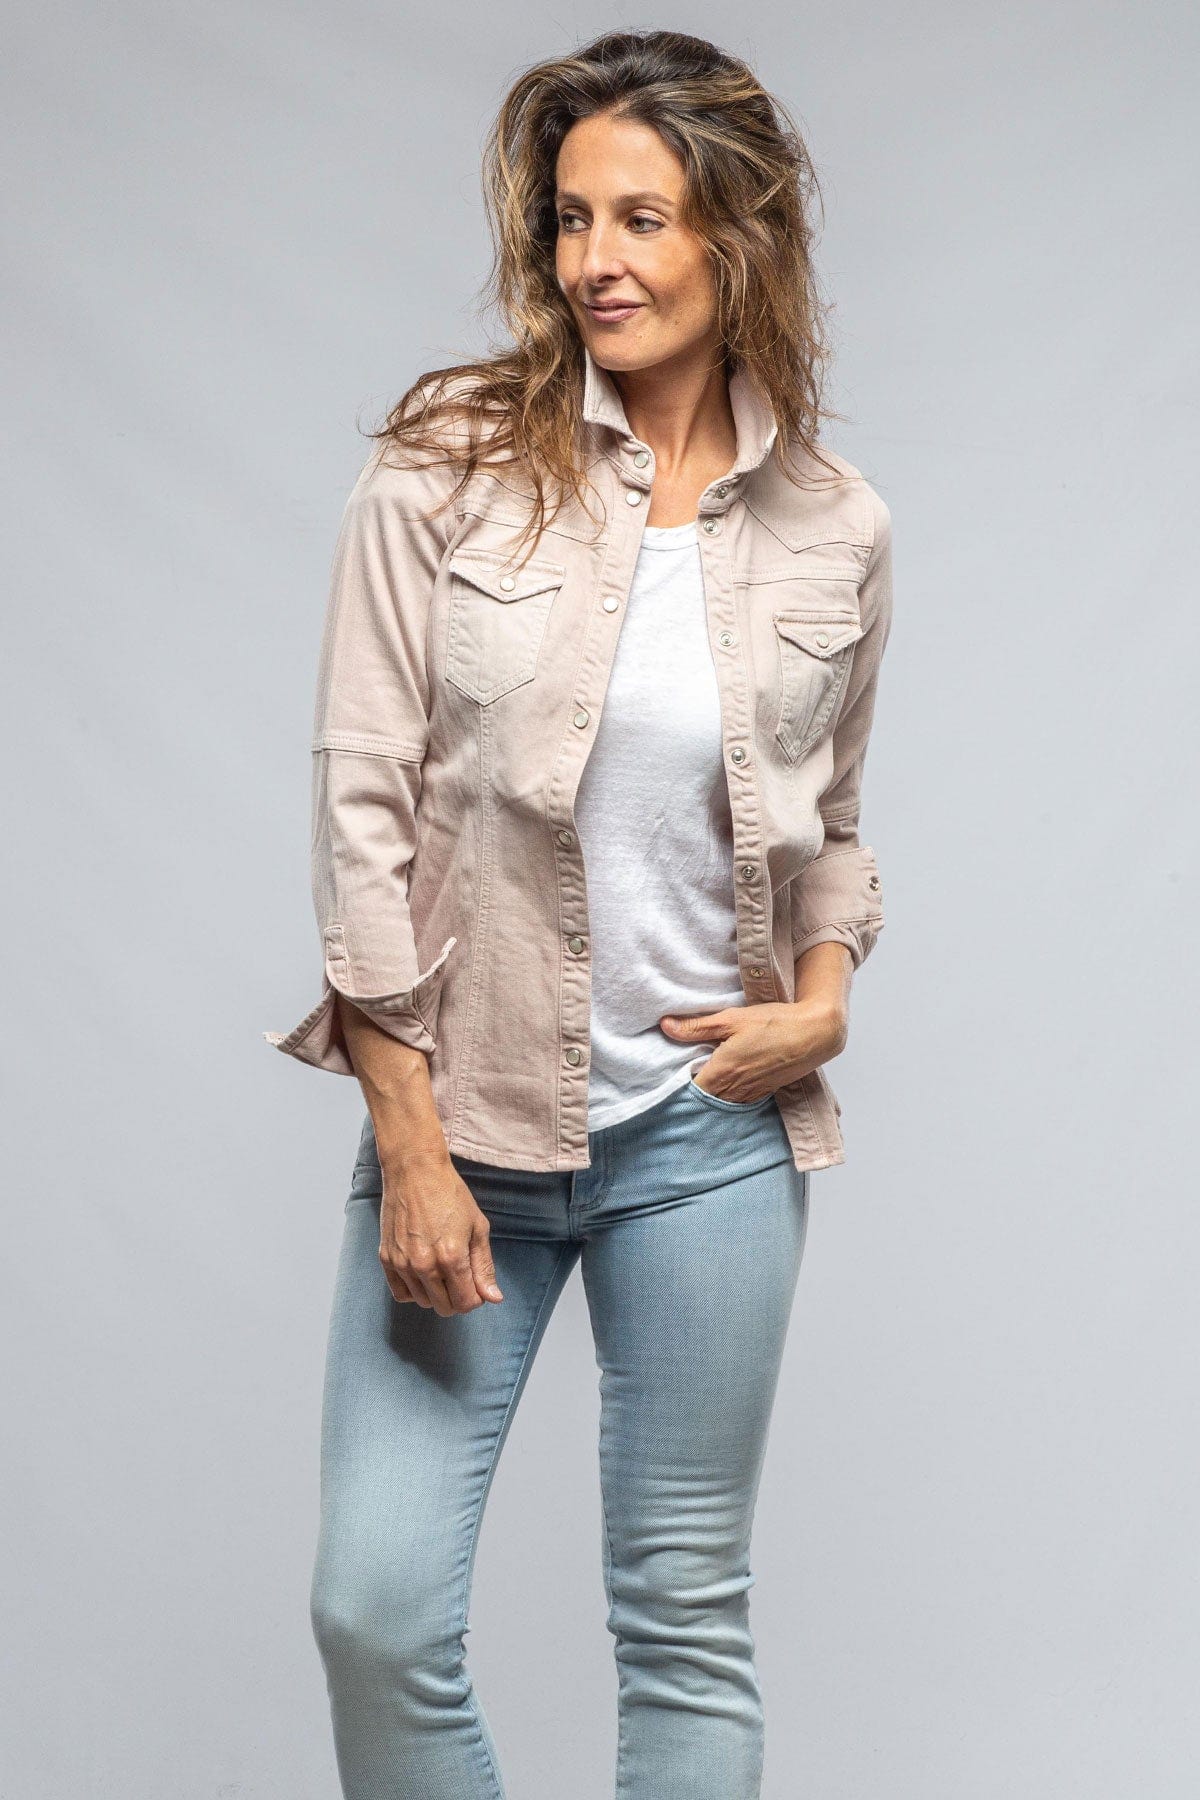 Sweetwater Denim Shirt In Light Sand - AXEL'S